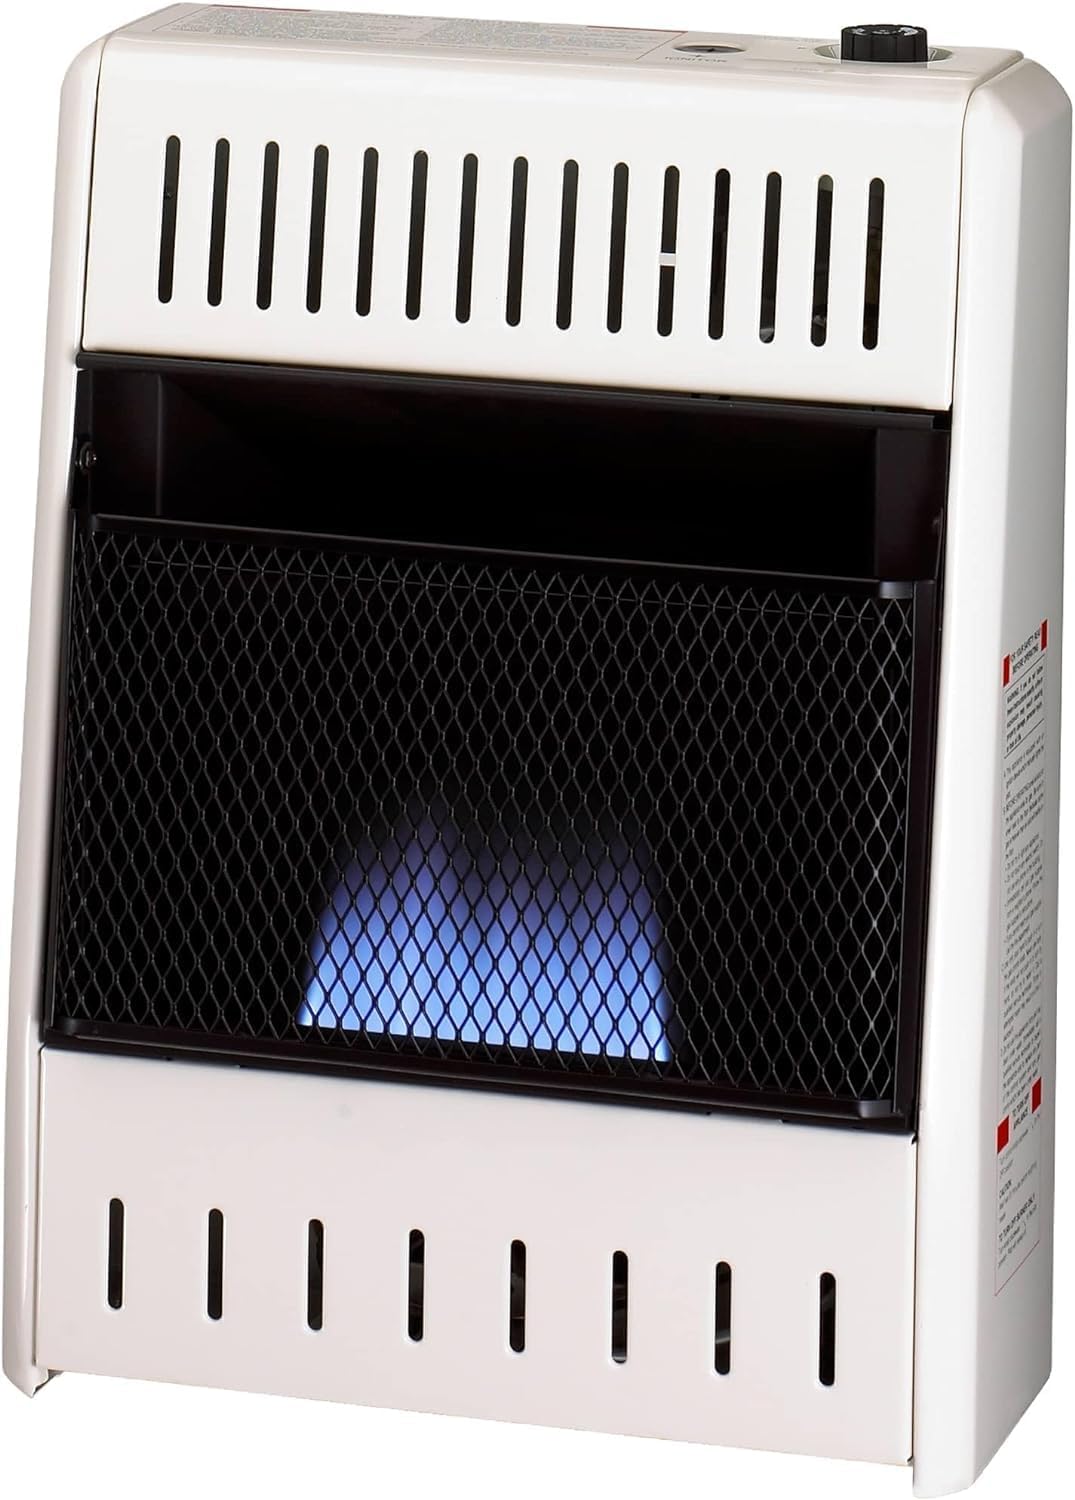 ProCom ML100TBA-B Ventless Propane Gas Blue Flame Space Heater with Thermostat Control for Home and Office Use, 10000 BTU, Heats Up to 500 Sq. Ft., Includes Wall Mount and Base Feet, White - ProCom ML100TBA-B Ventless Propane Gas Blue Flame Space Heater Review